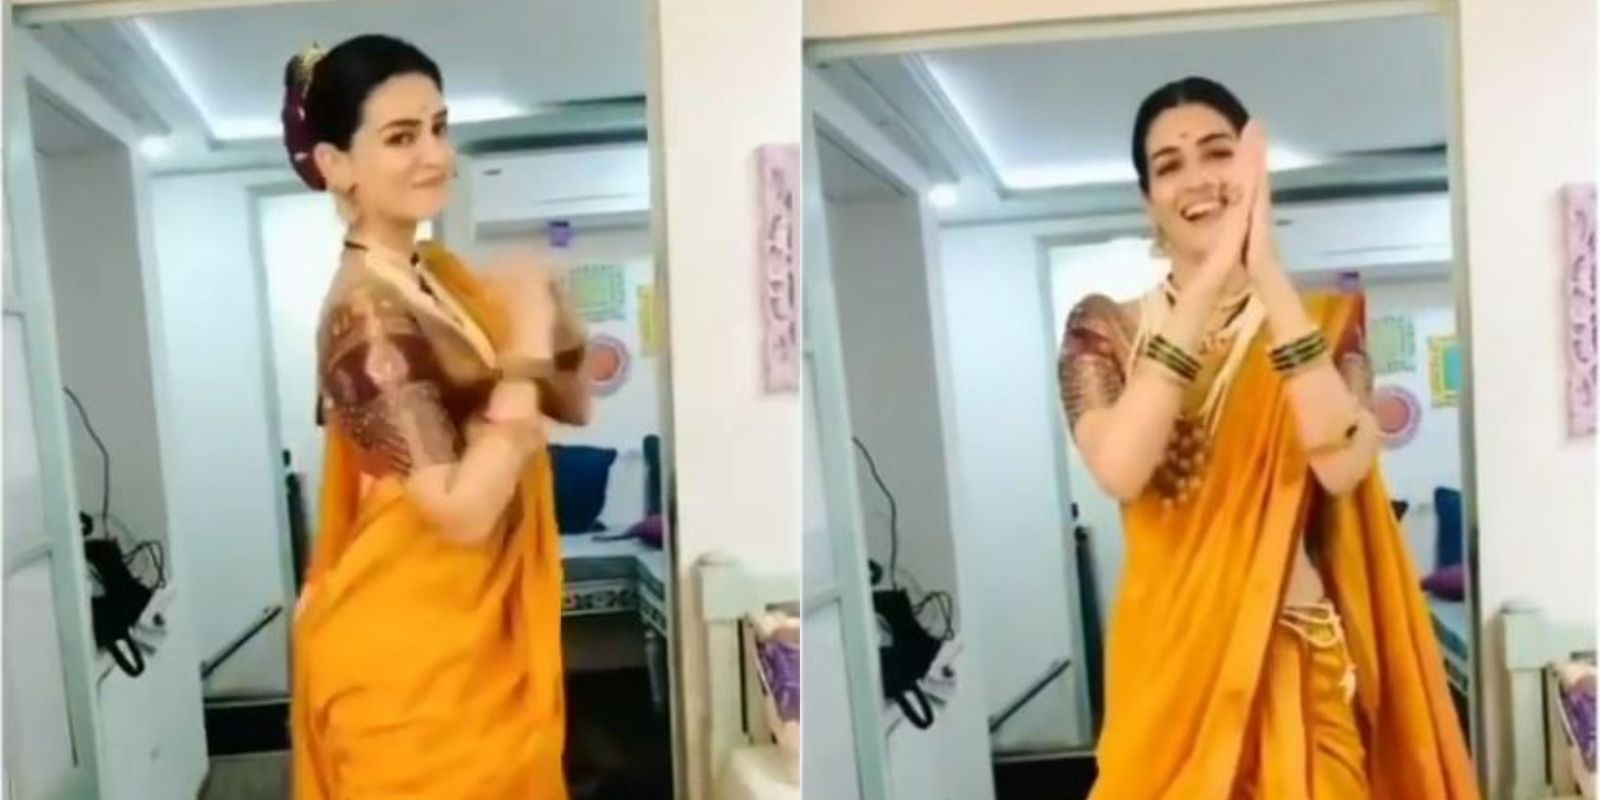 WATCH: Kriti Sanon Dancing To ‘Coca-Cola’ In Her Parvati Bai Avatar Is The Funniest Thing You Will See On The Internet Today